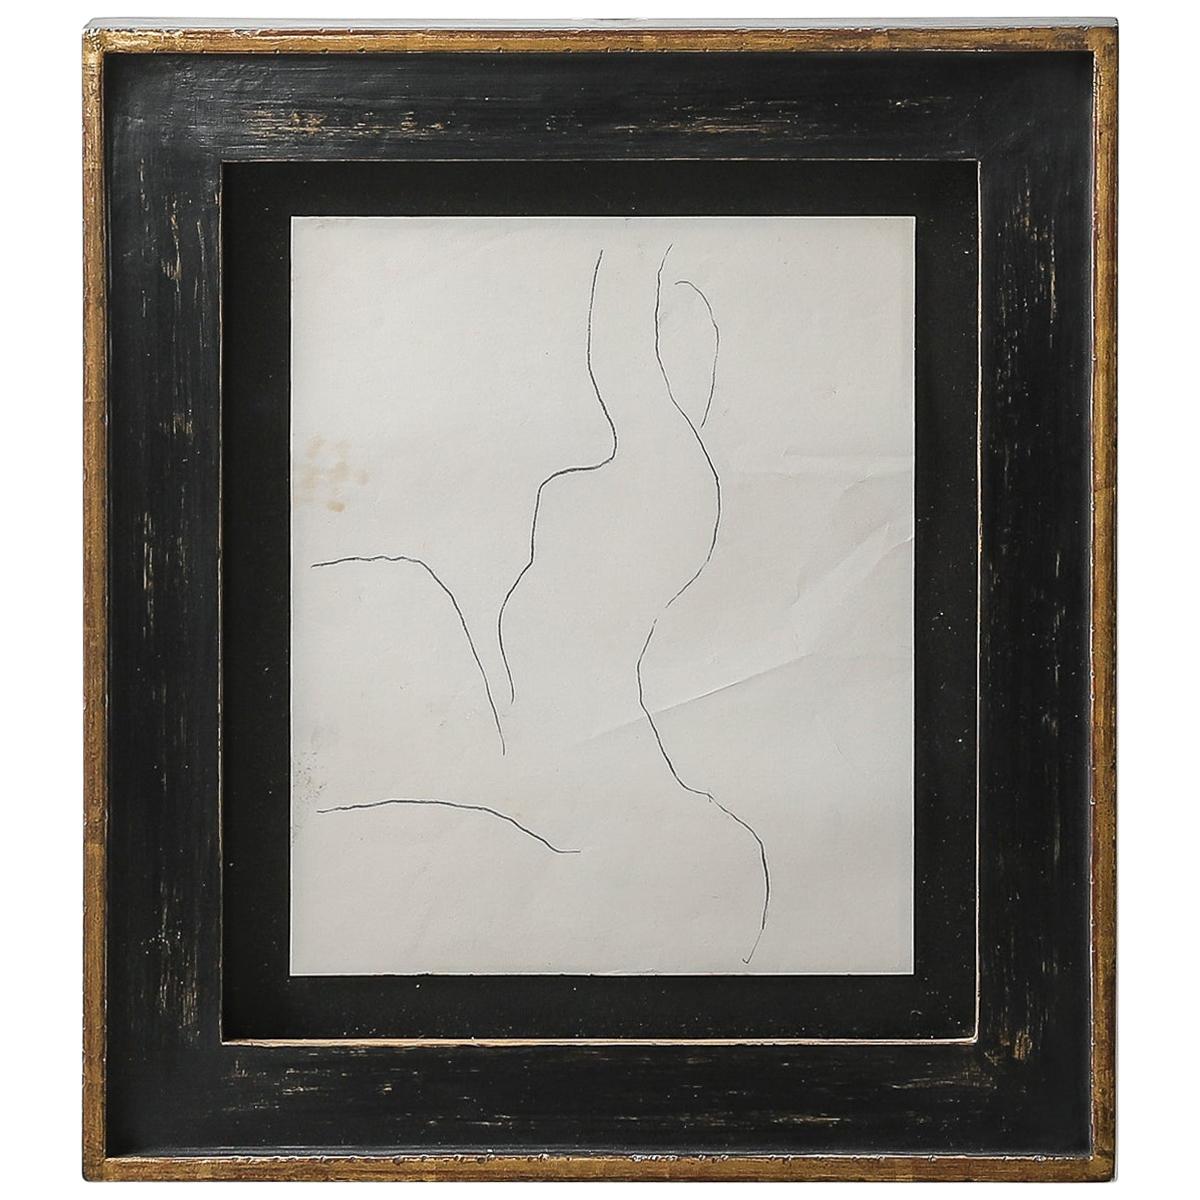 Roger Hilton, 'Untitled' Charcoal and Pencil on Paper, circa 1970